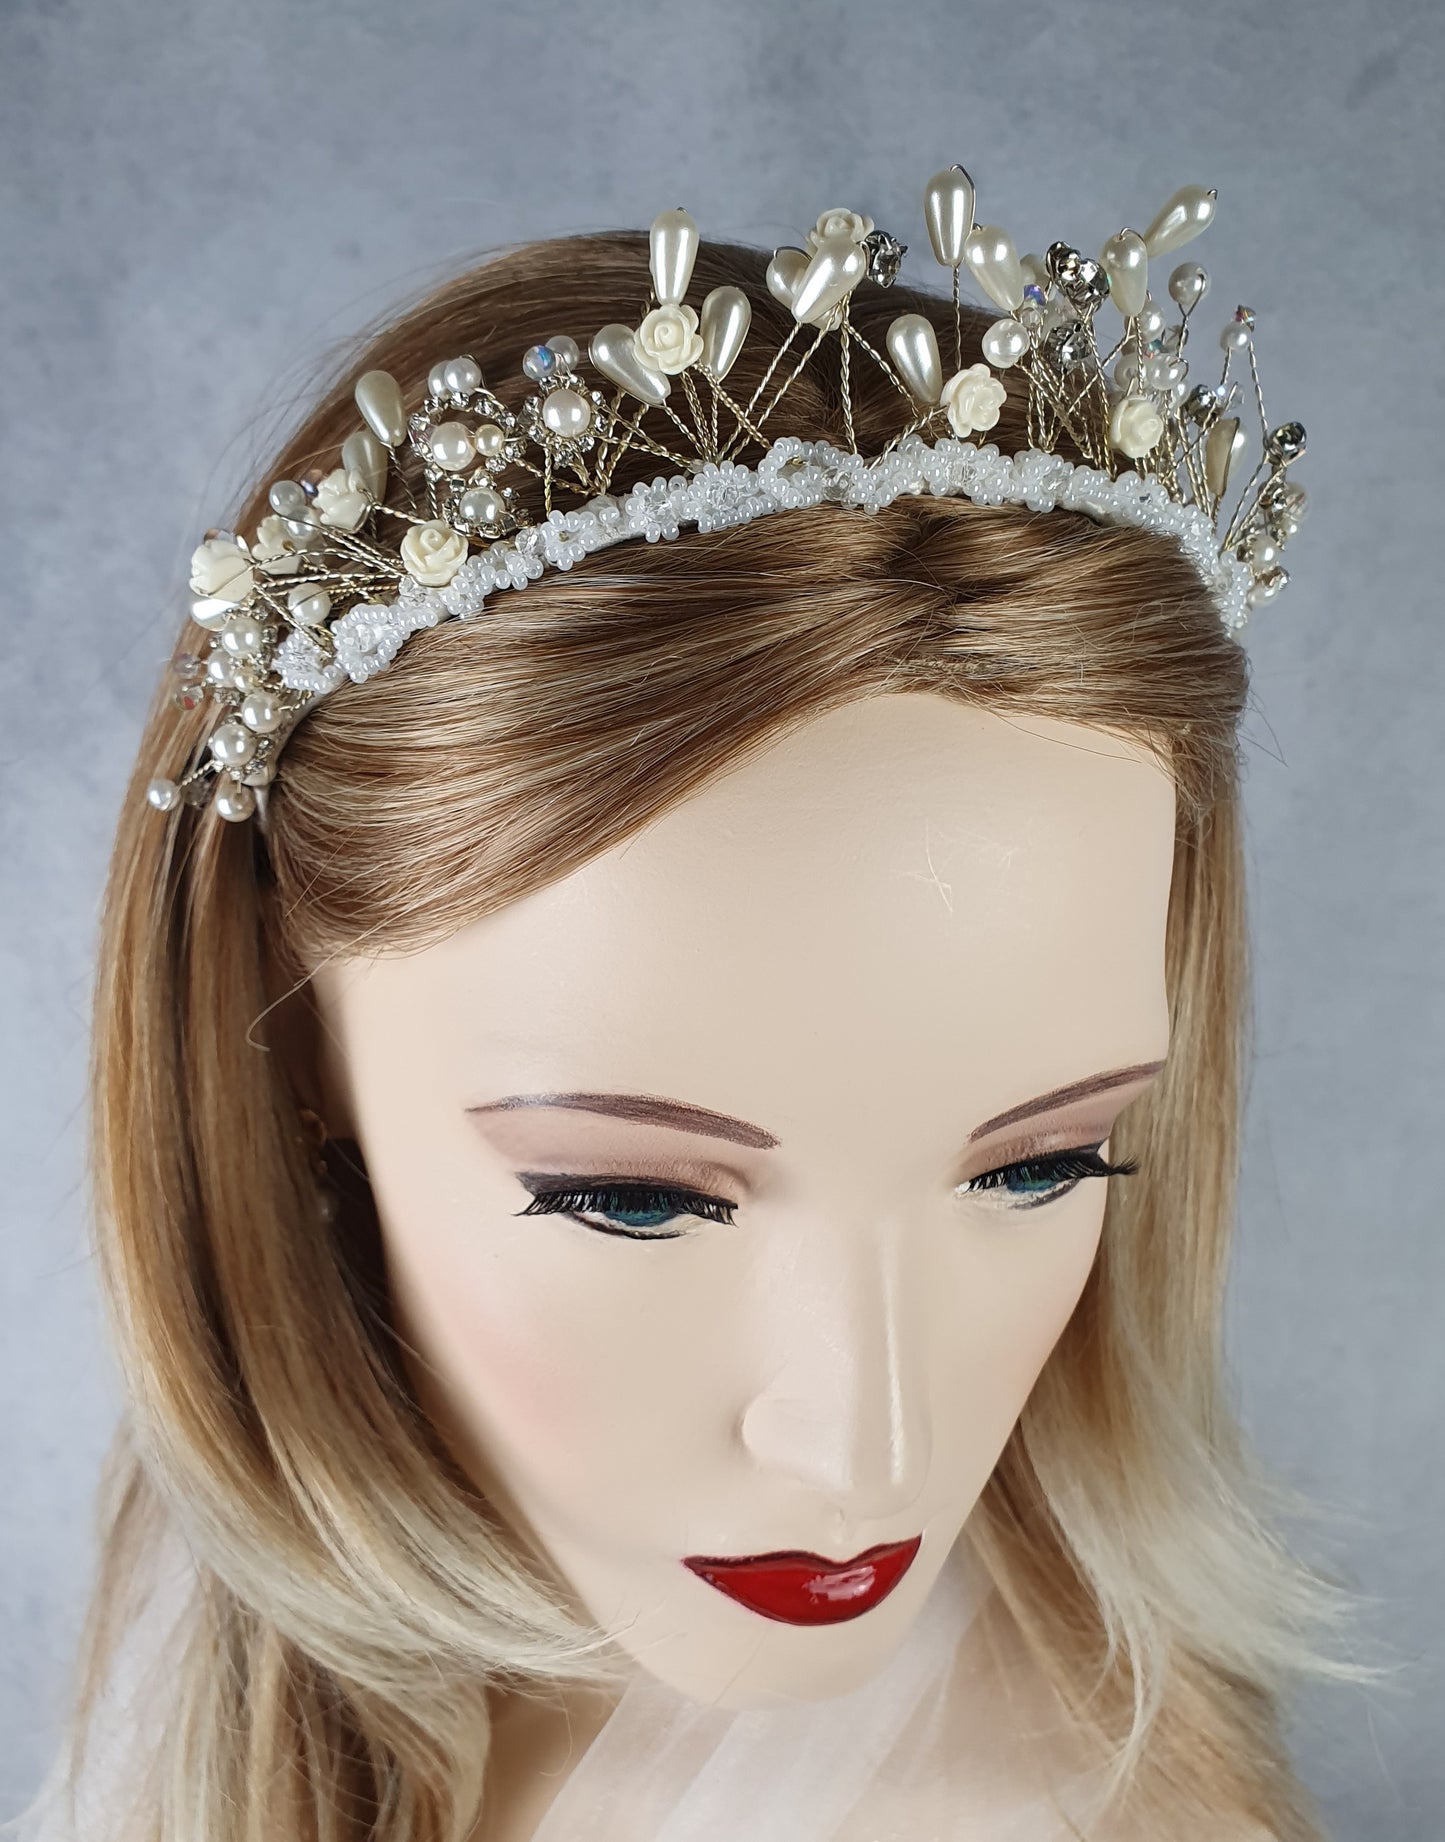 Handmade headband with roses and pearls crystal stones - Beautiful headband, unique festive diadem, wedding, special occasion